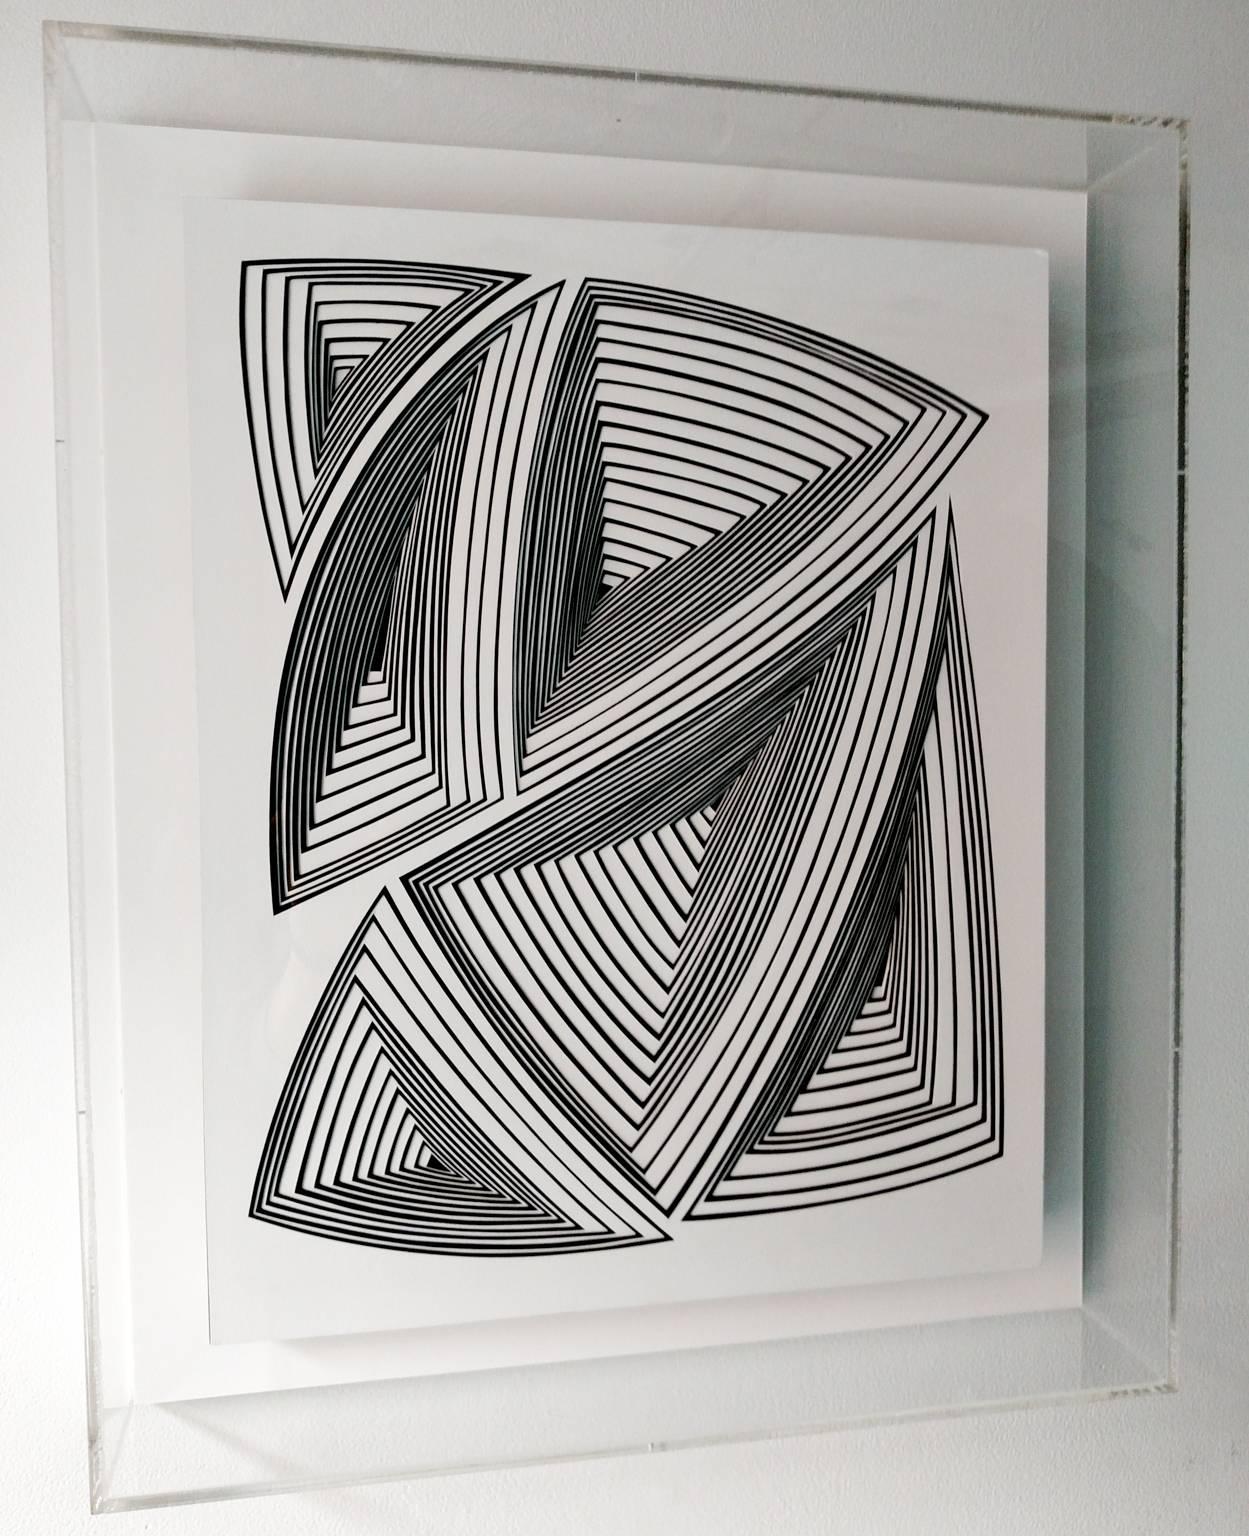 Freehand Cut with Surgical Scalpel on 2 ply Museum: Black & White Abstract - In  - Painting by Elizabeth Gregory-Gruen